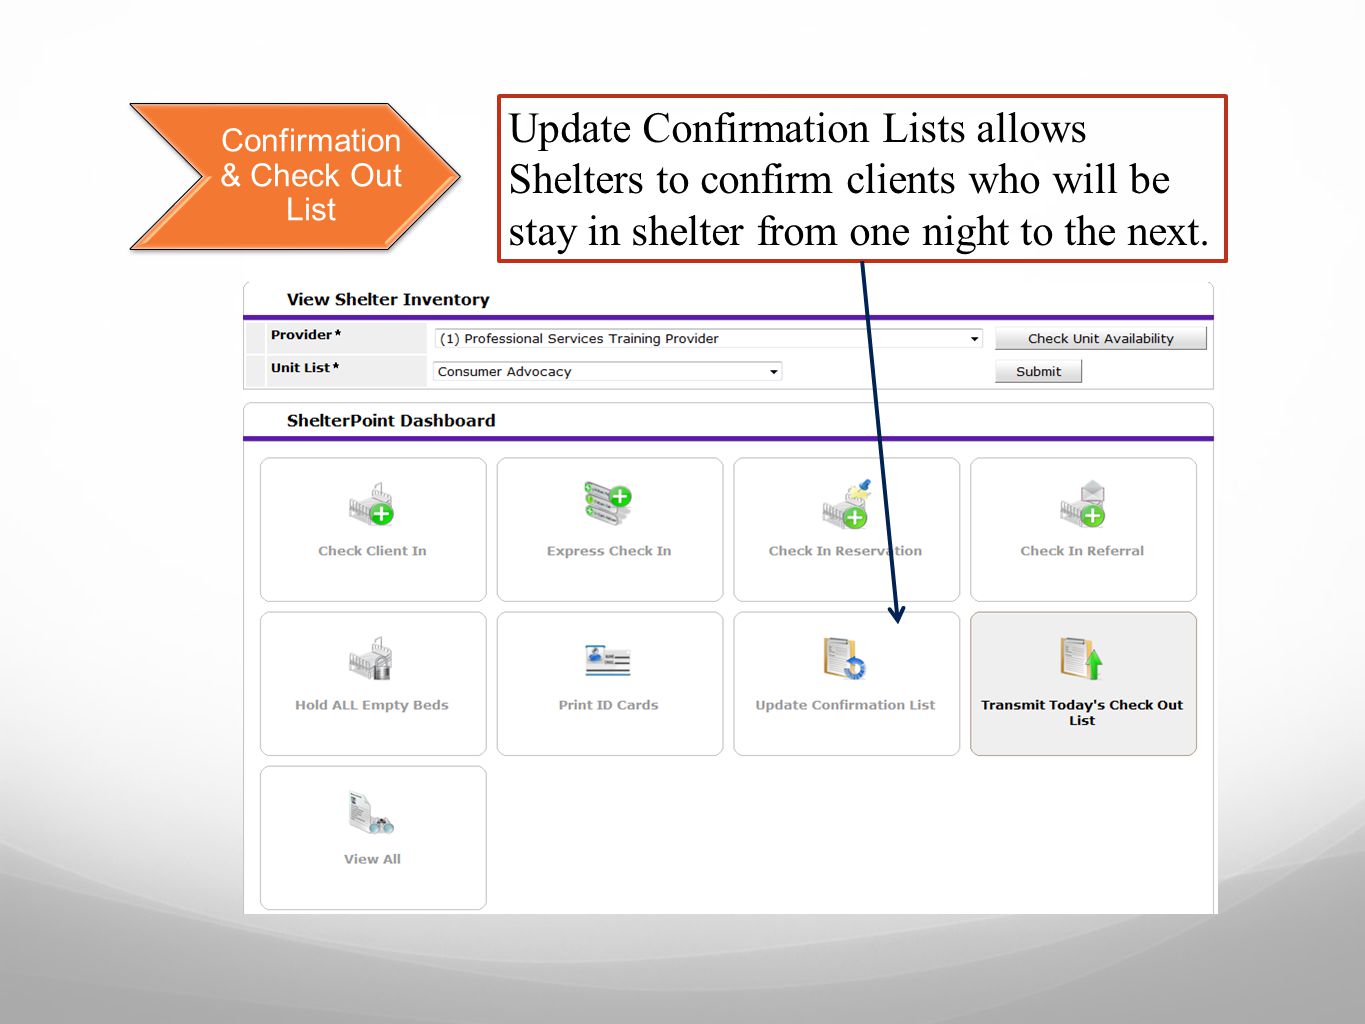 Confirmation & Check Out List Update Confirmation Lists allows Shelters to confirm clients who will be stay in shelter from one night to the next.